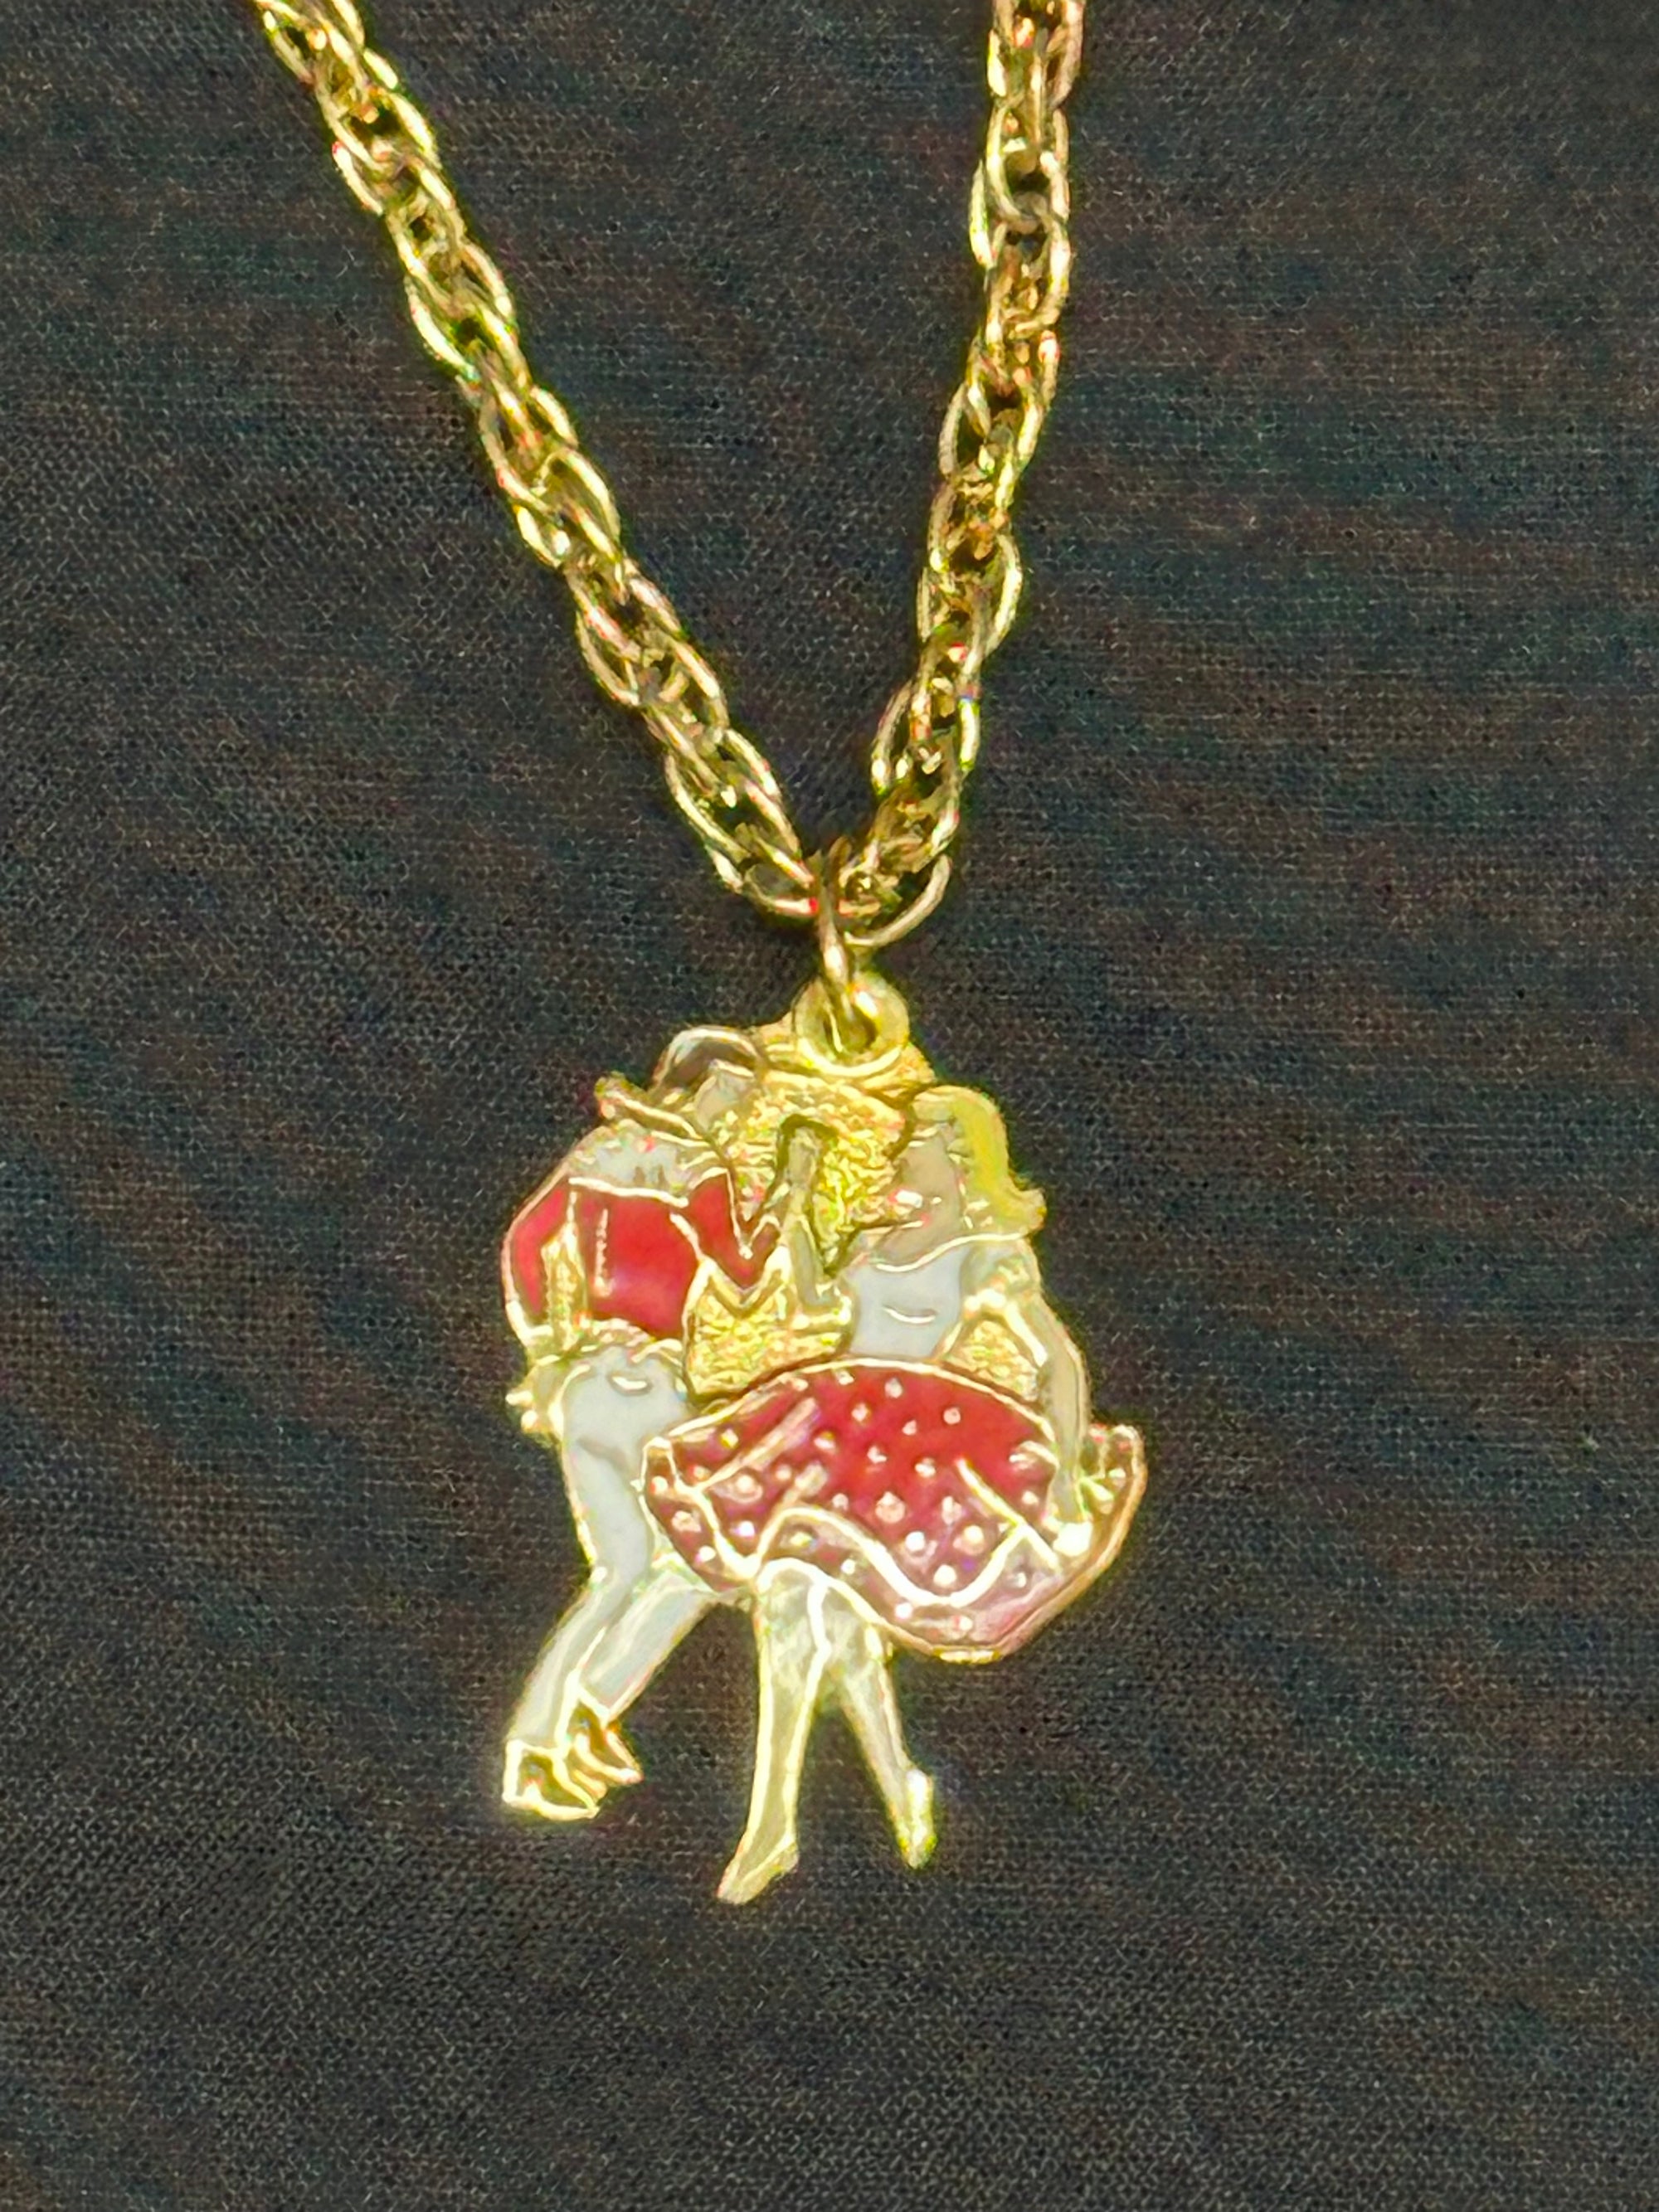 A Red and Yellow Square Dancers Necklace by Square Up Fashions.